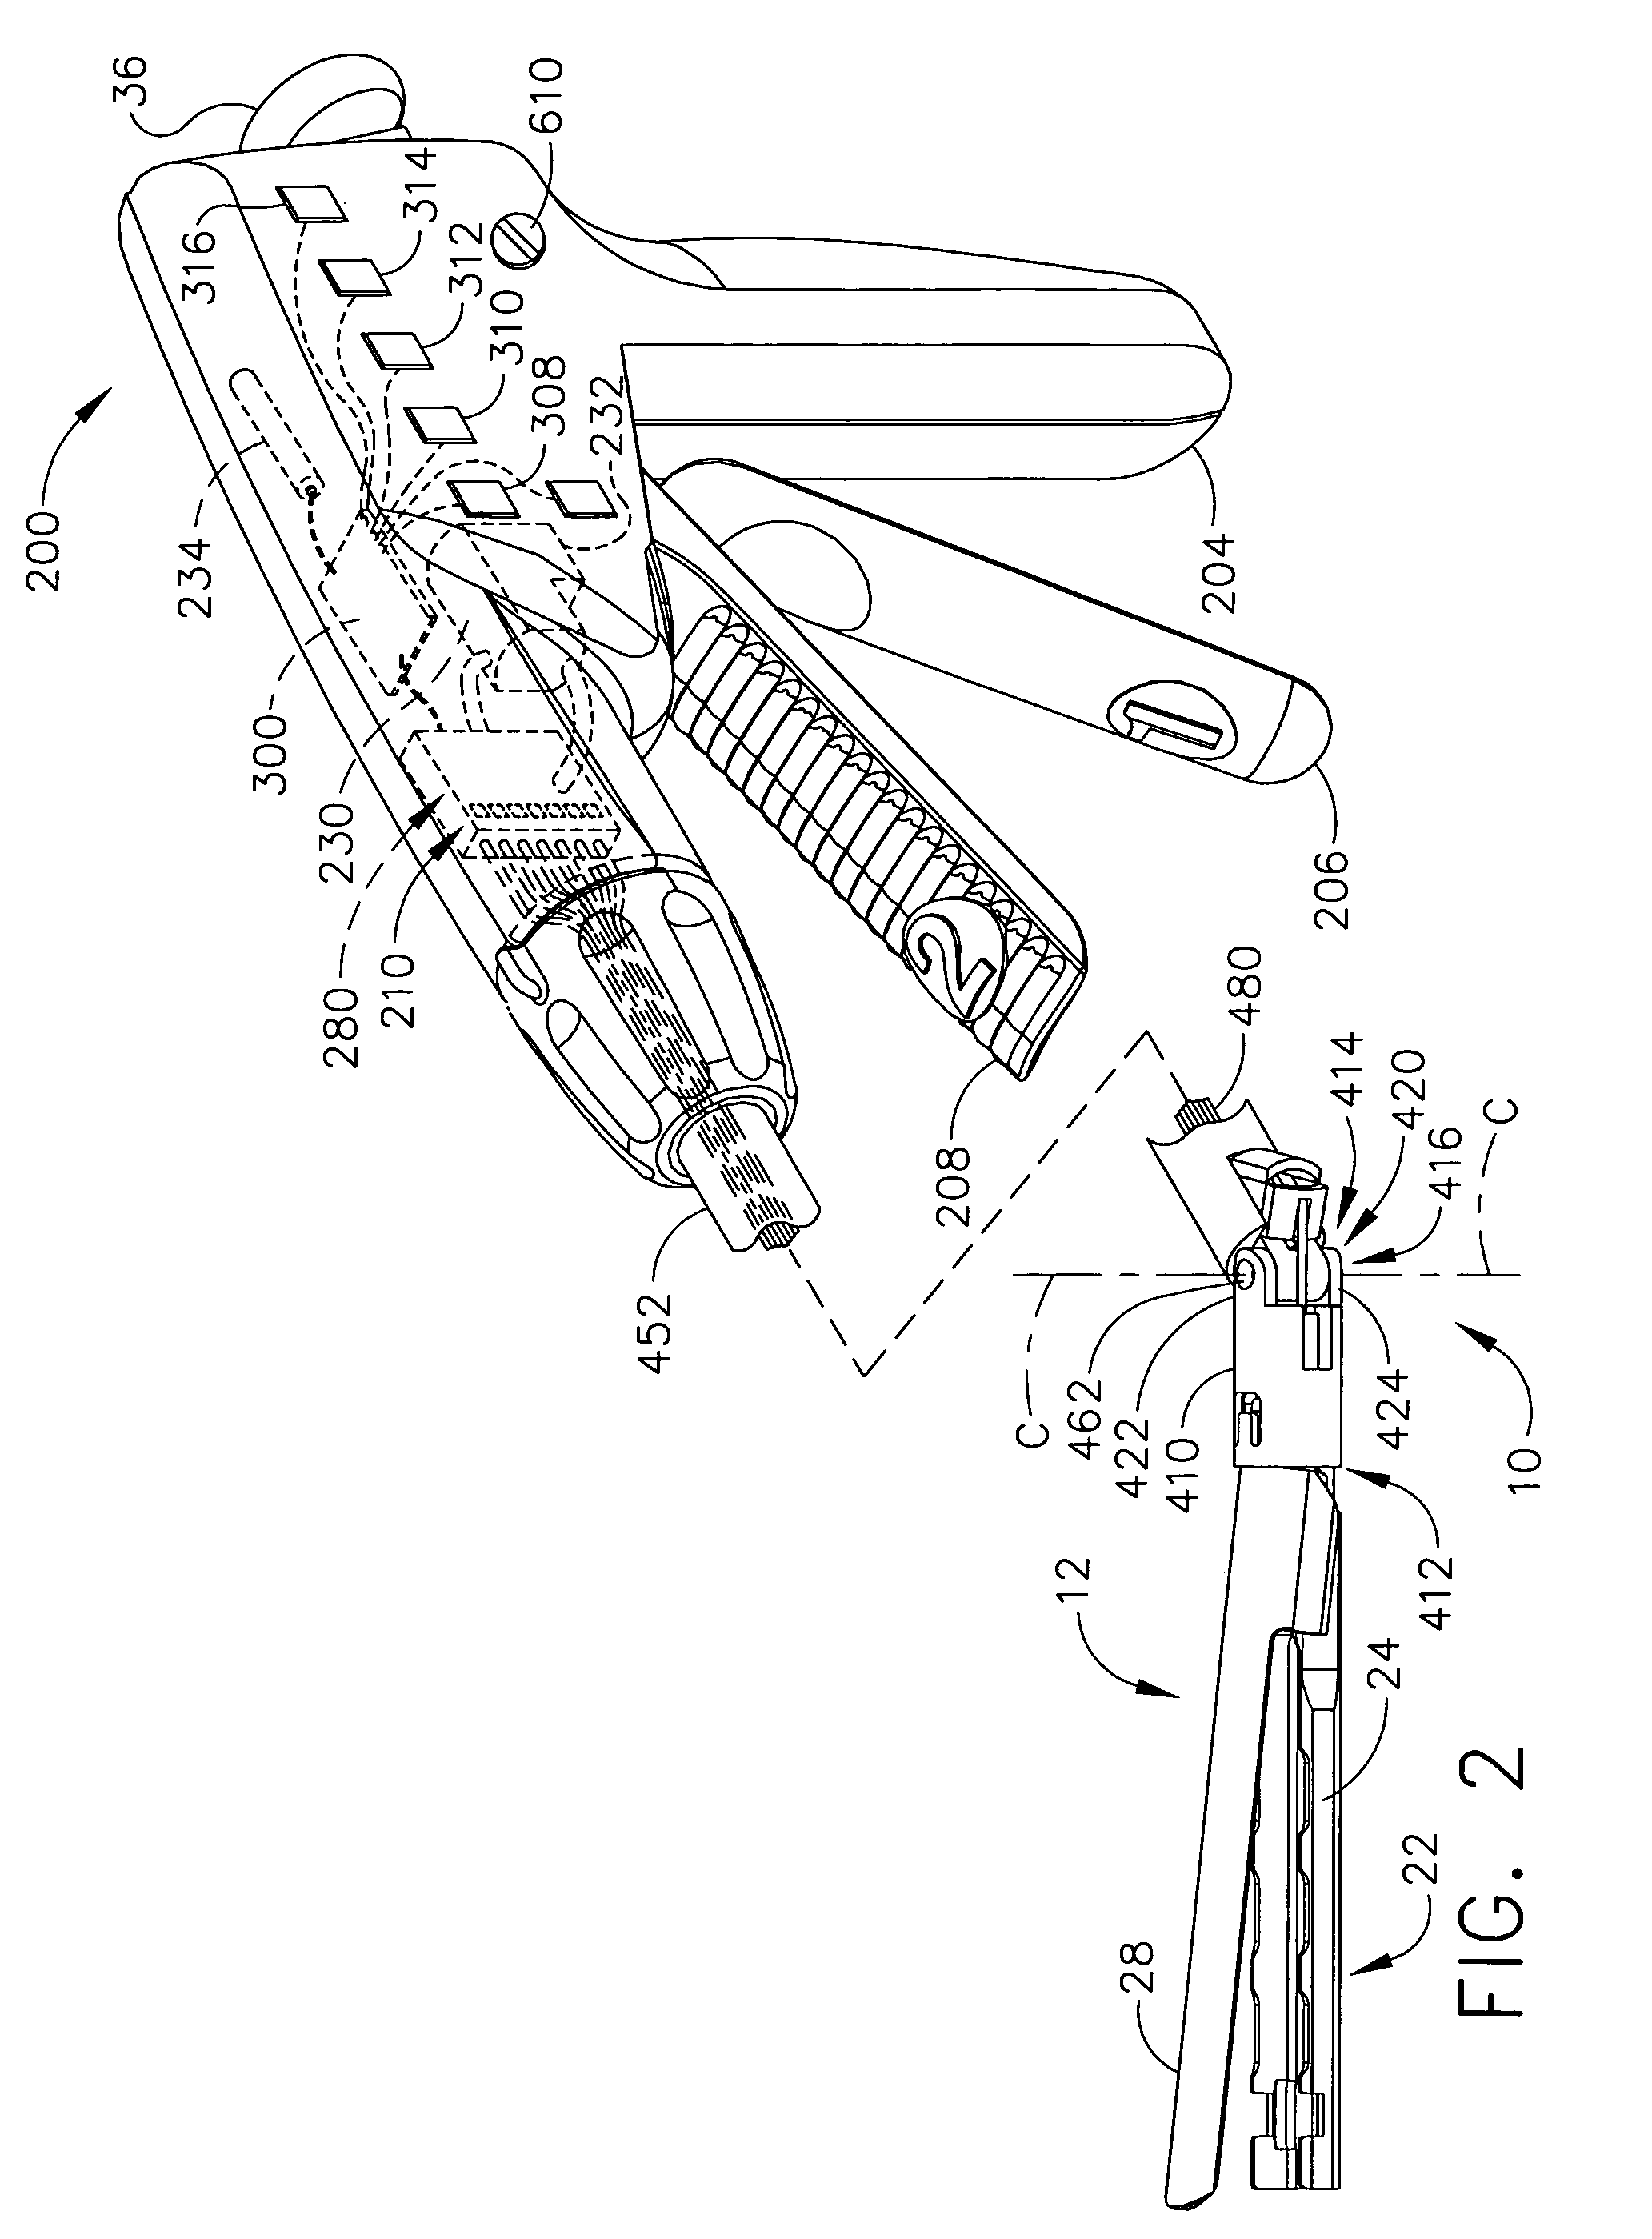 Articulation joint with improved moment arm extension for articulating an end effector of a surgical instrument